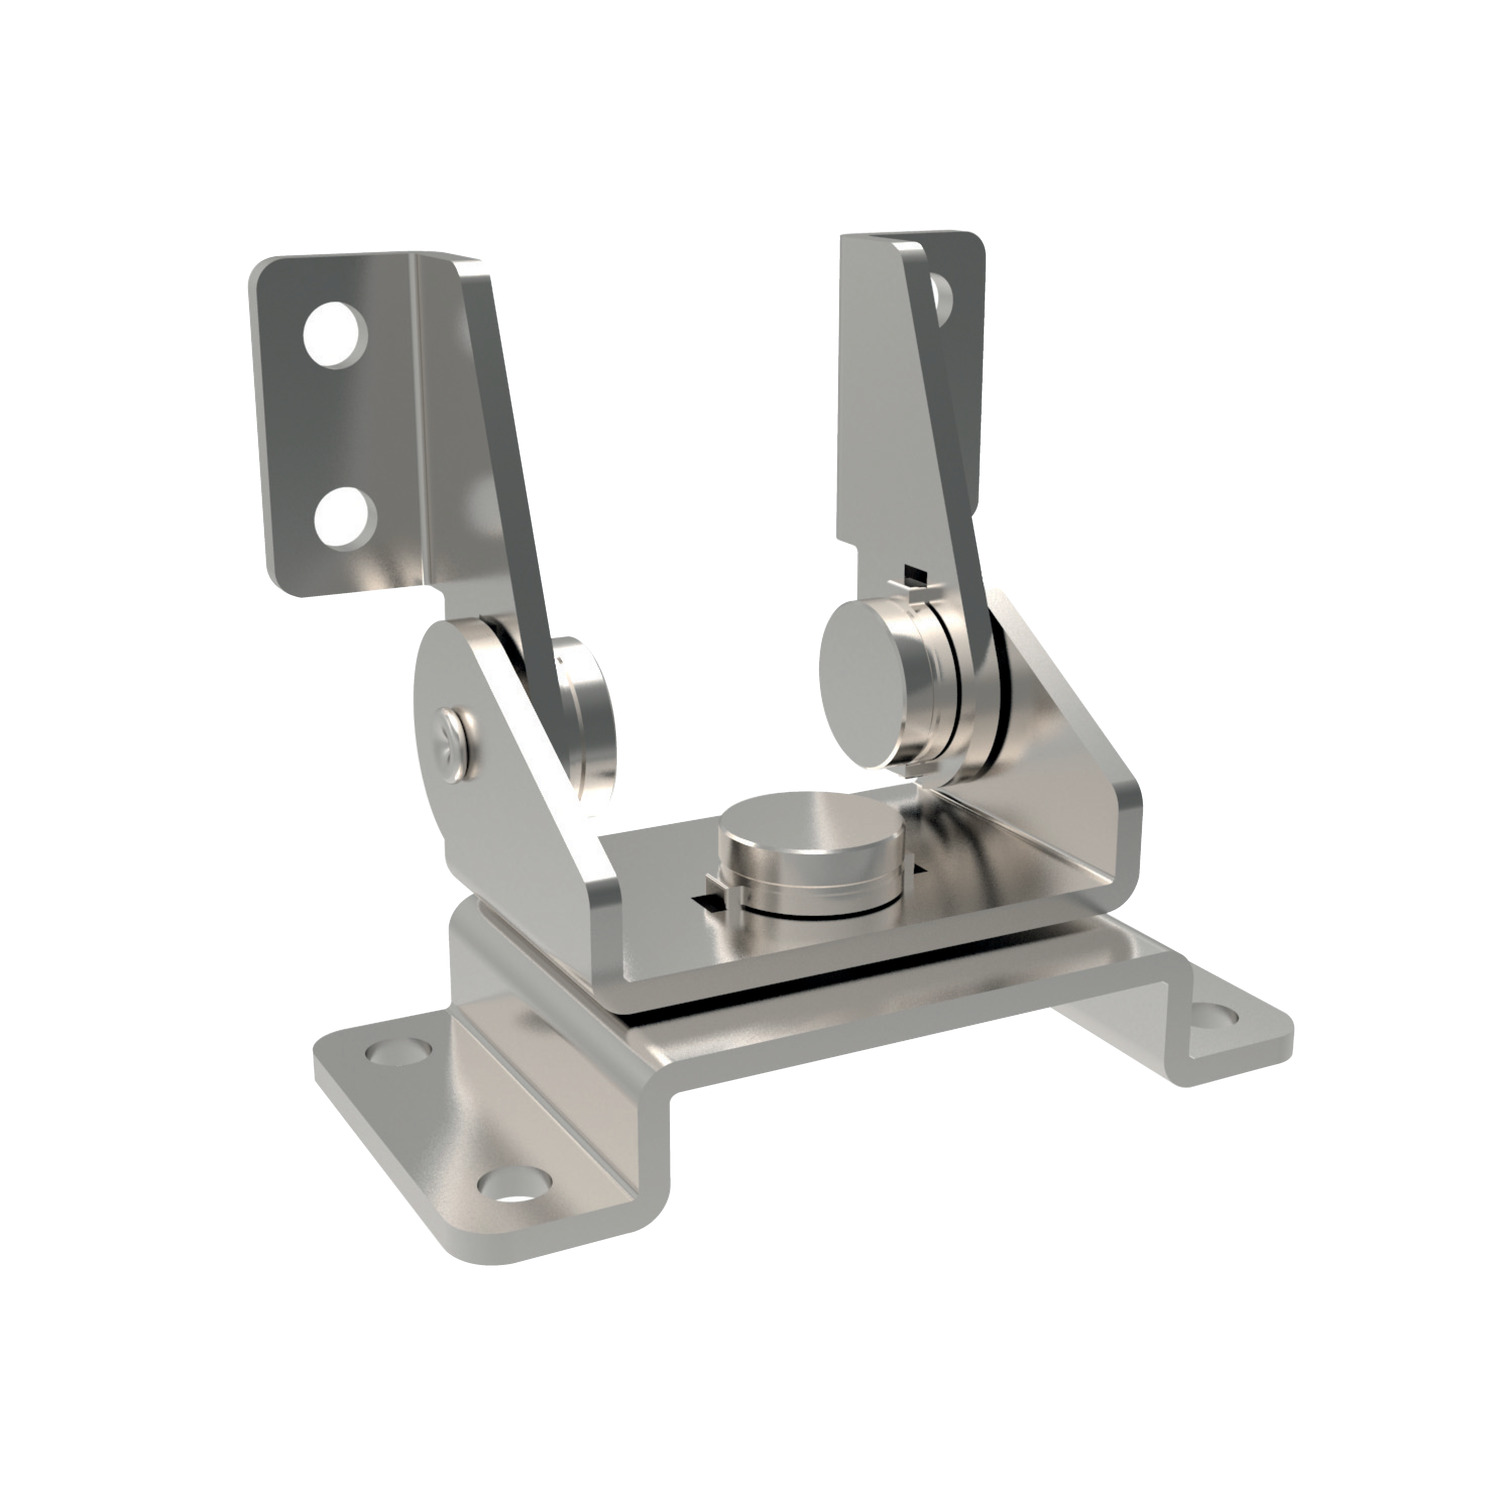 Constant Torque - Dual Axis Friction Hinges Dual axis constant torque friction hinges made from stainless steel (430). Stability is provided in both axes and angle of swivel can be limited with use of a pin or screw.